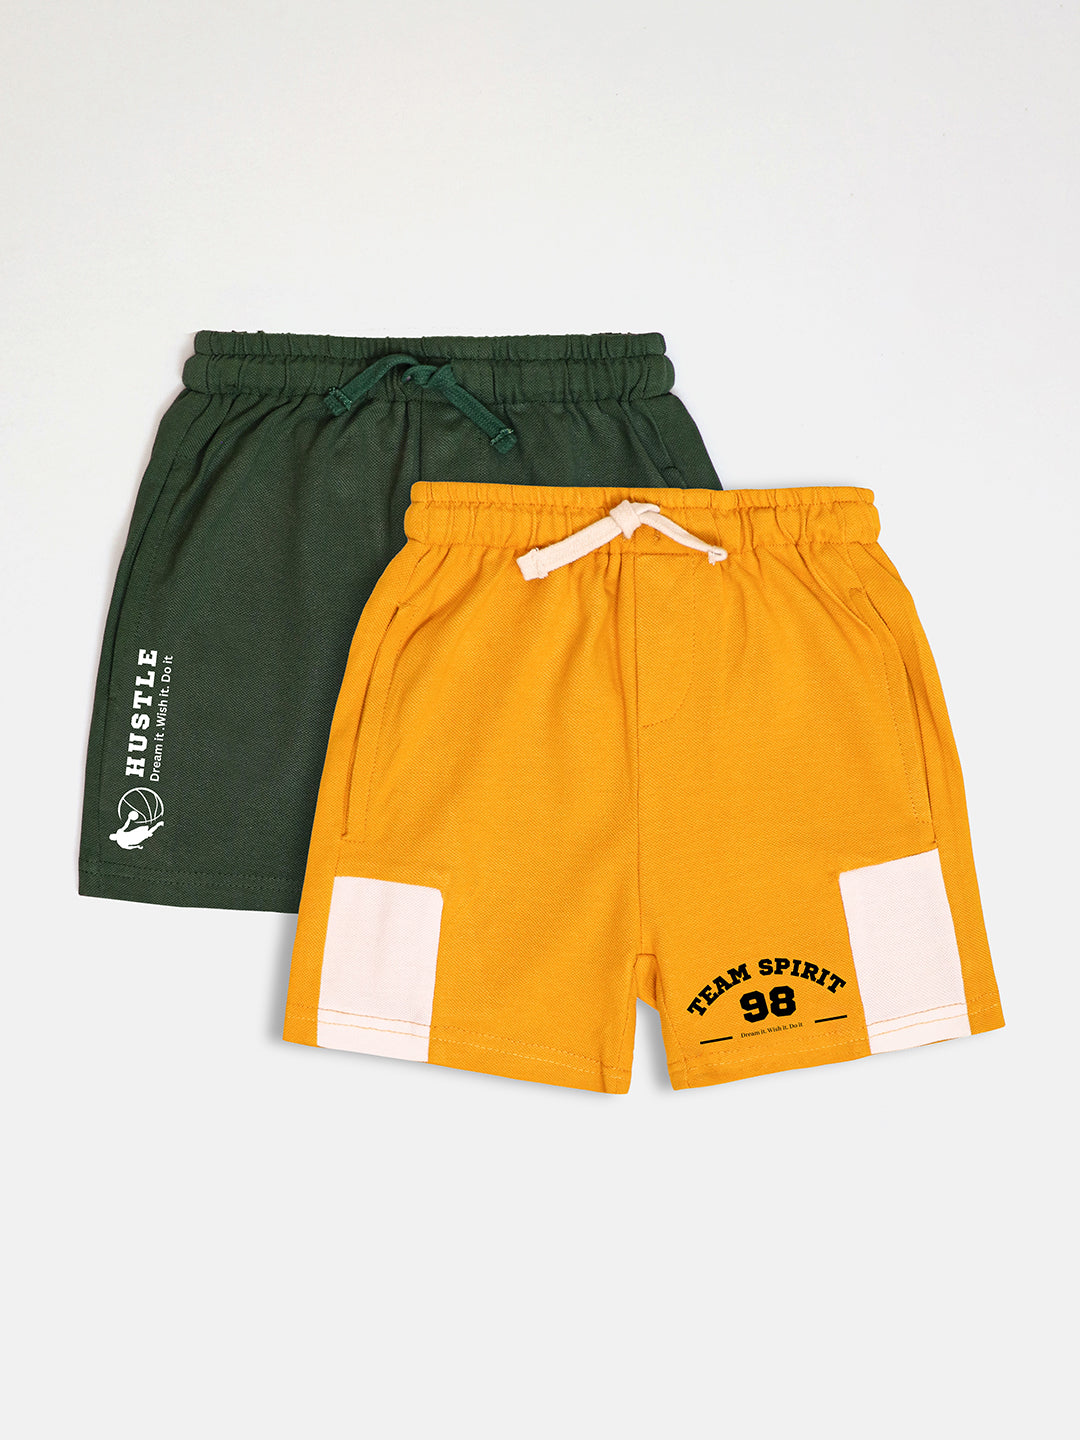 Boys Cotton Shorts Combo- Green and Yellow